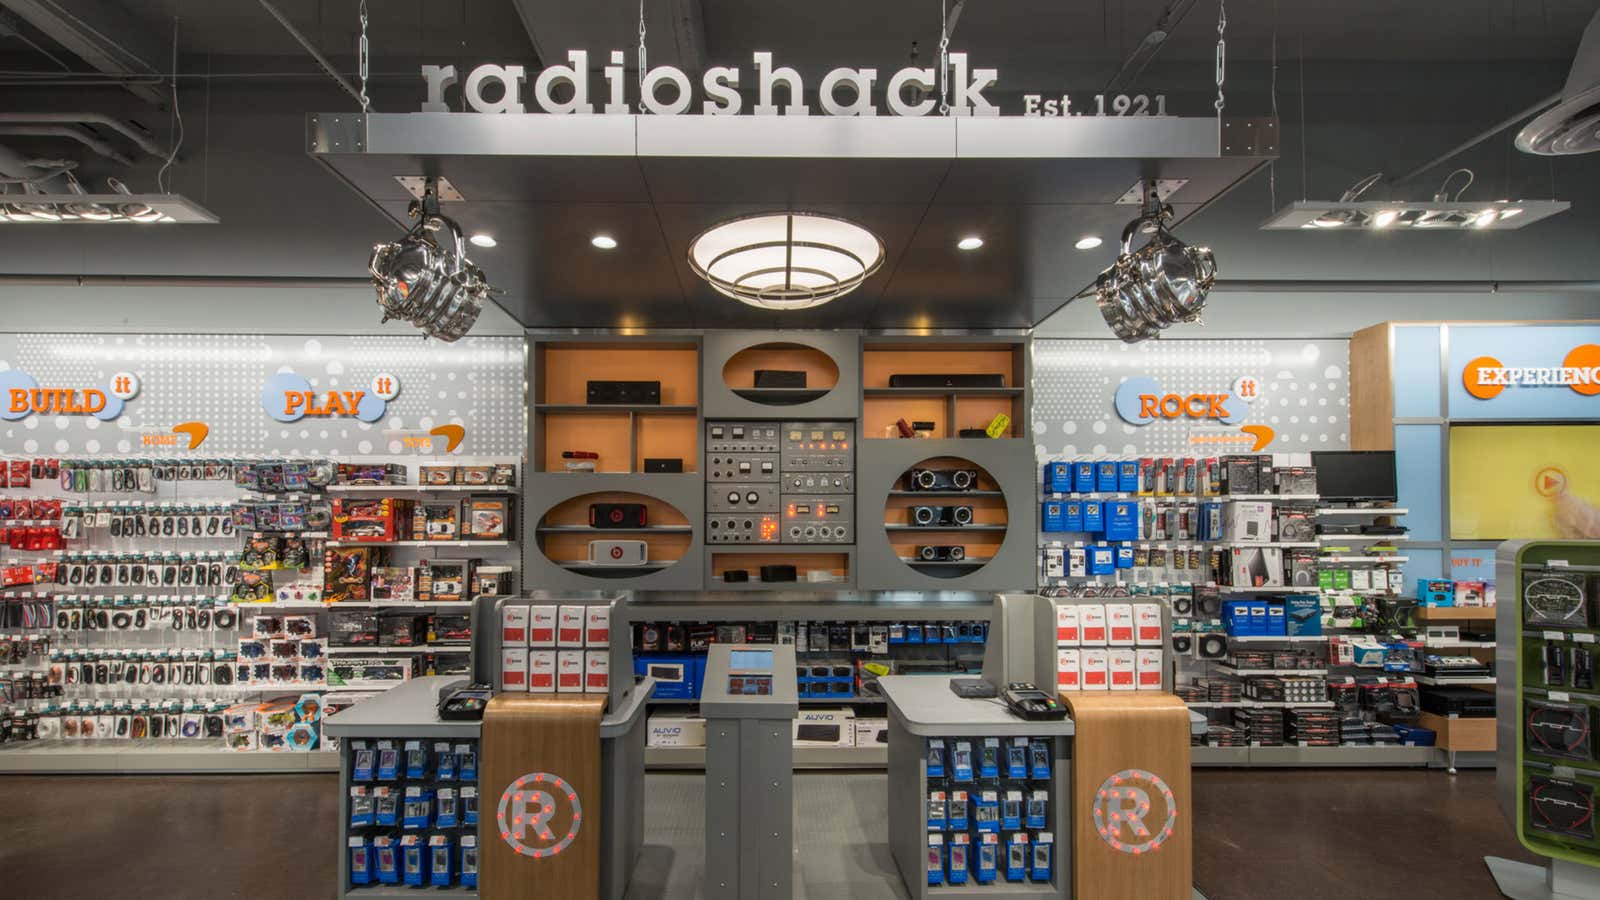 This is not your father’s Radio Shack.